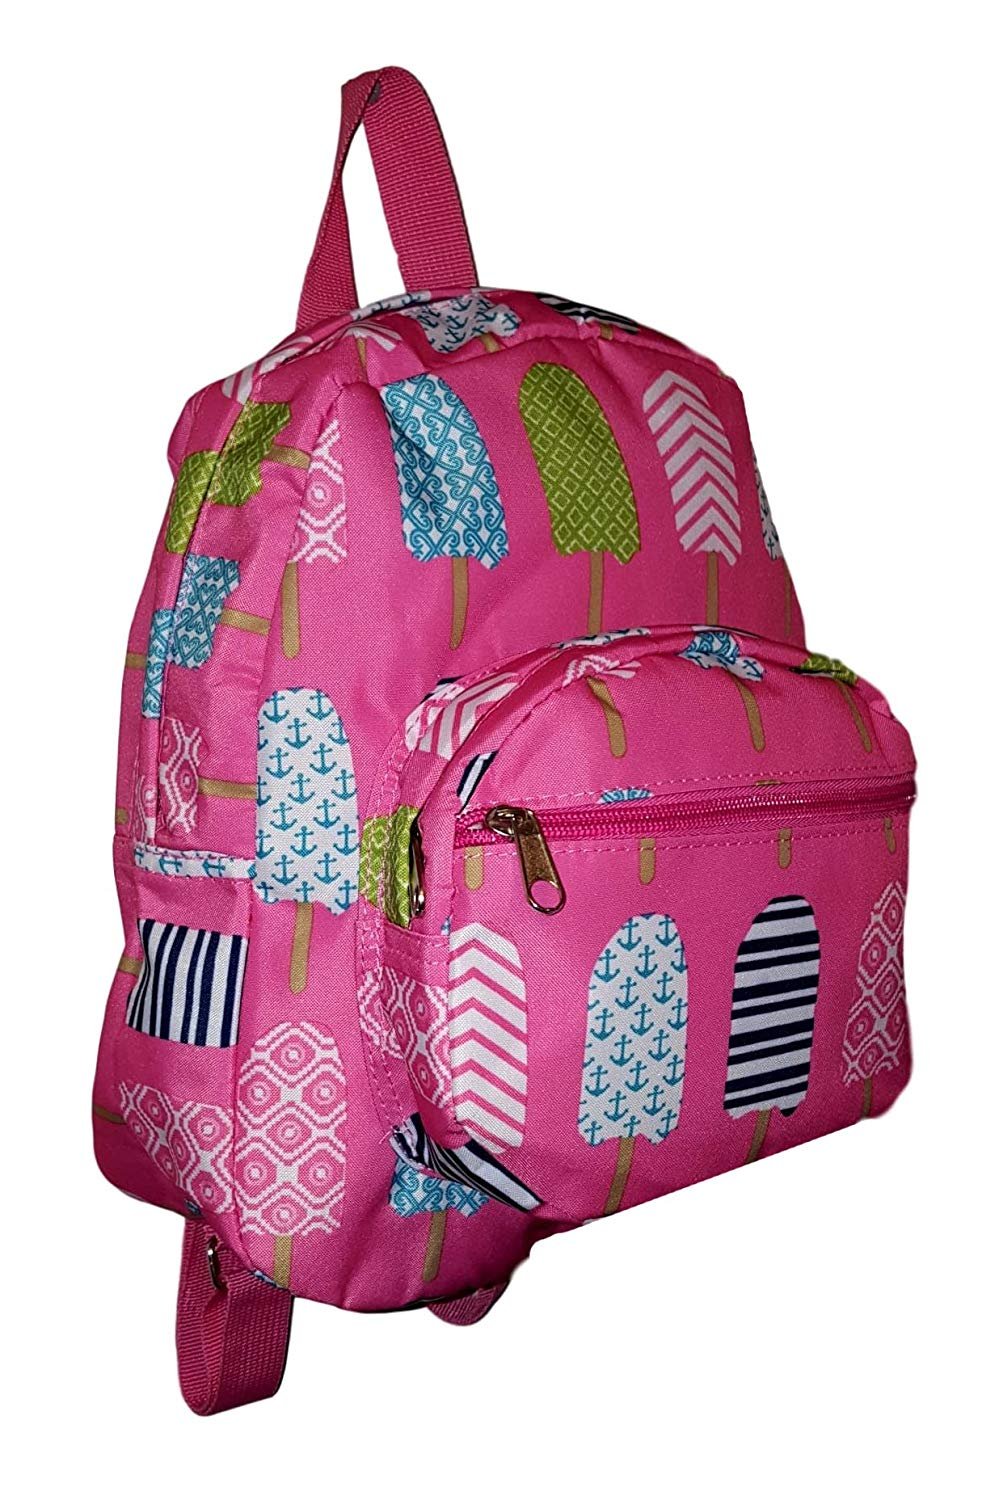 11-inch Mini Backpack Purse, Zipper Front Pockets Teen Child Pink Ice Cream Print - image 1 of 3